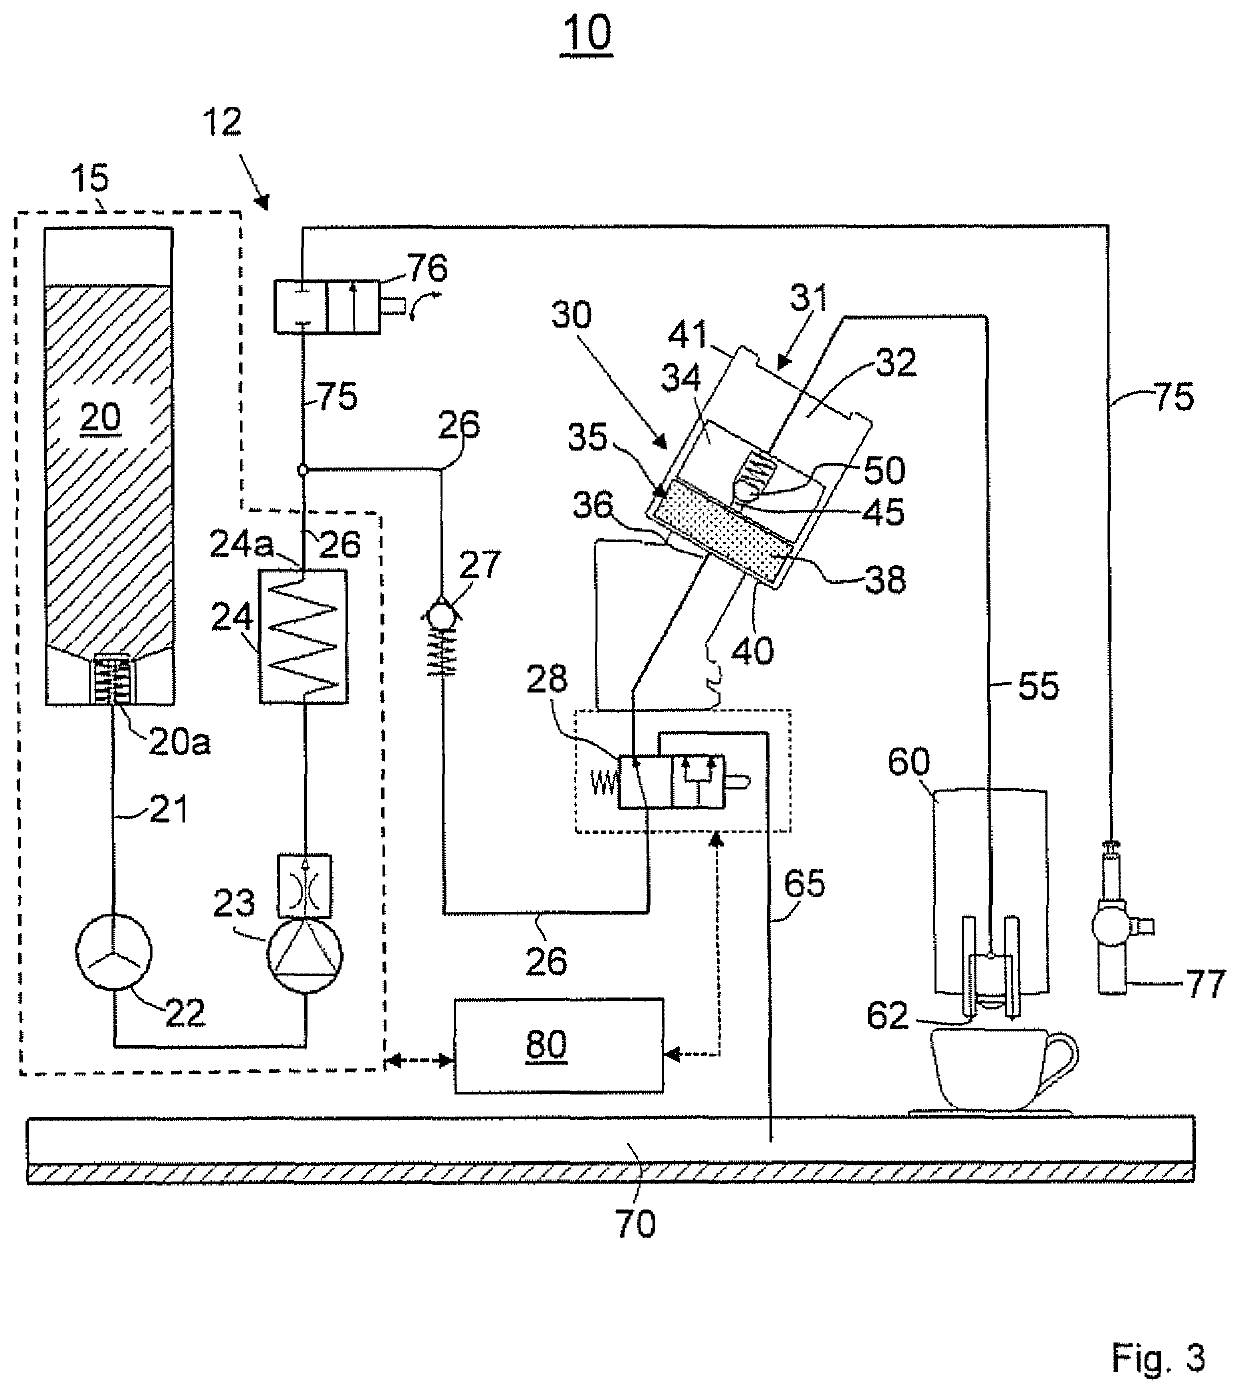 Method for producing a coffee beverage in a coffee machine